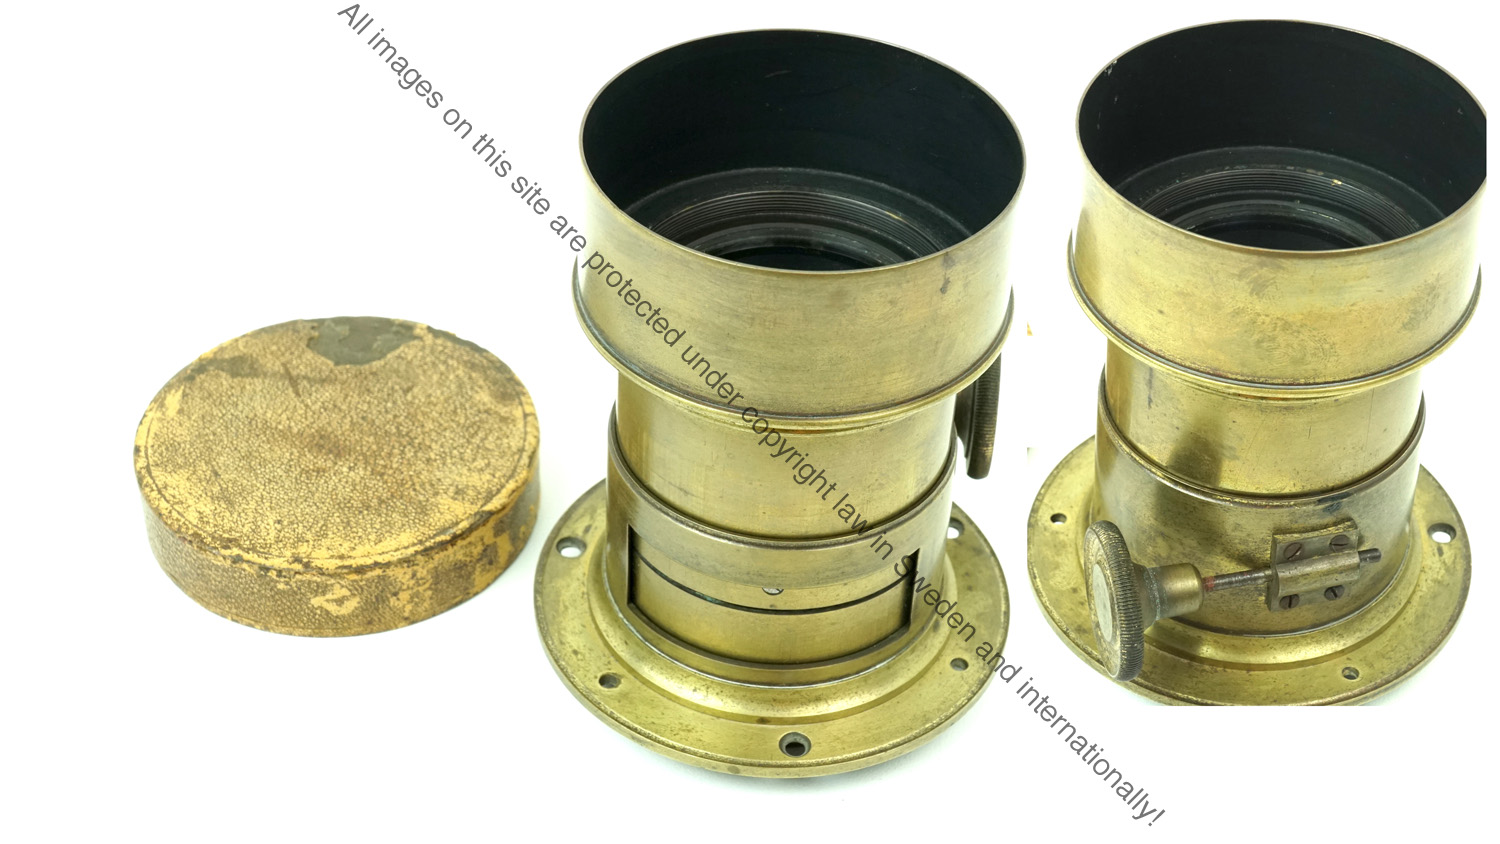 Unmarked Petzval lens1